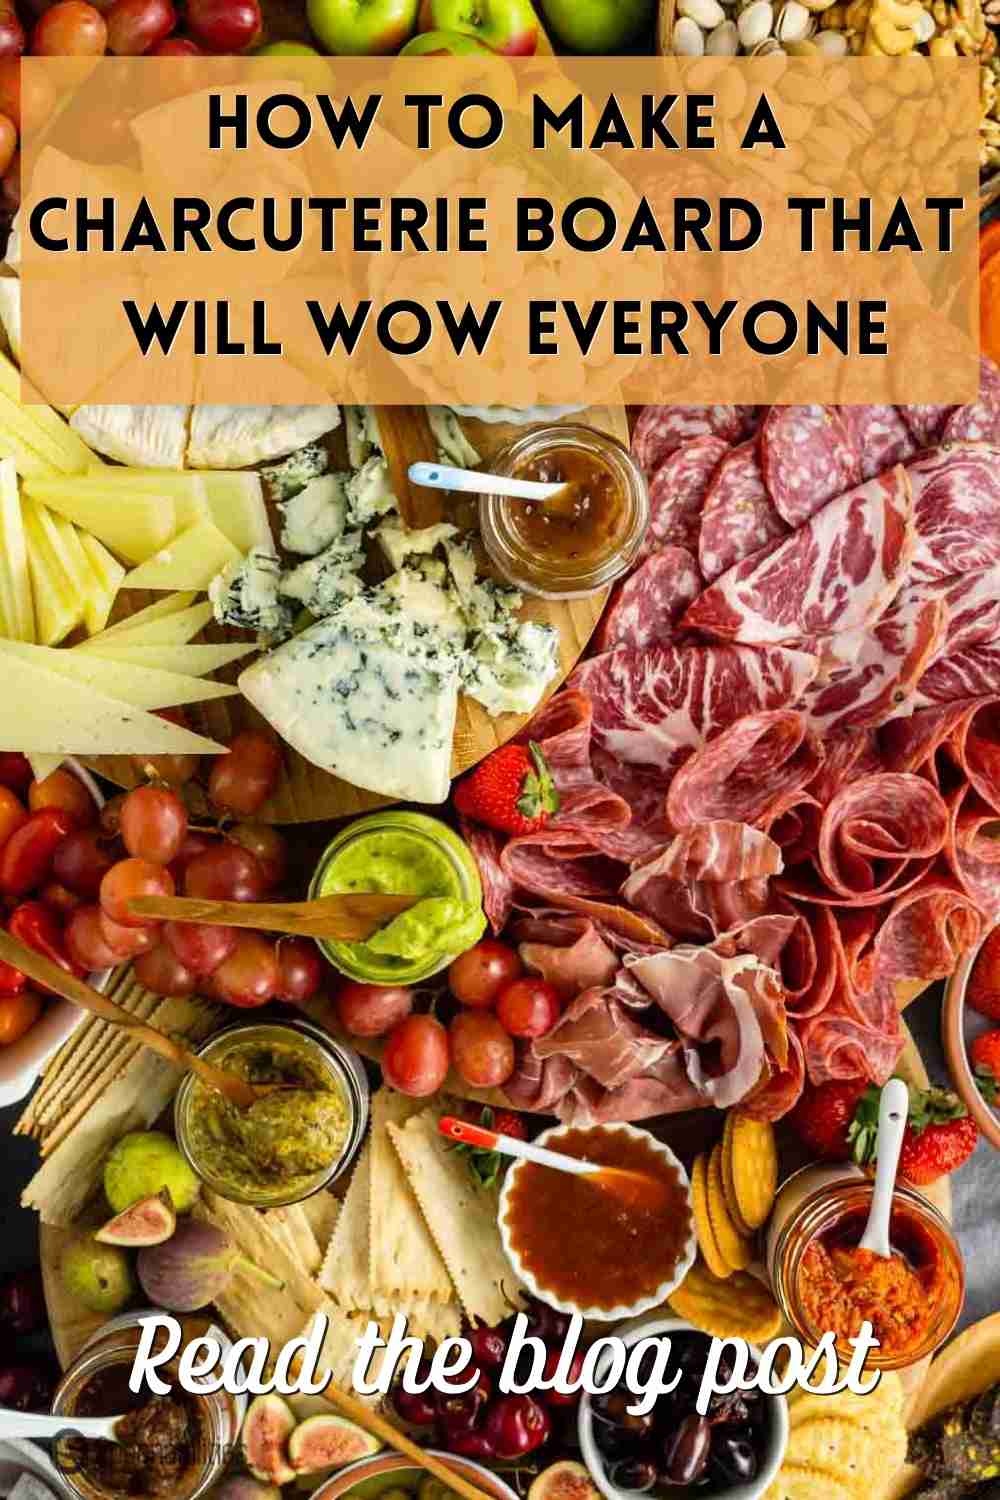 How to Make a Charcuterie Board That Will Wow Everyone